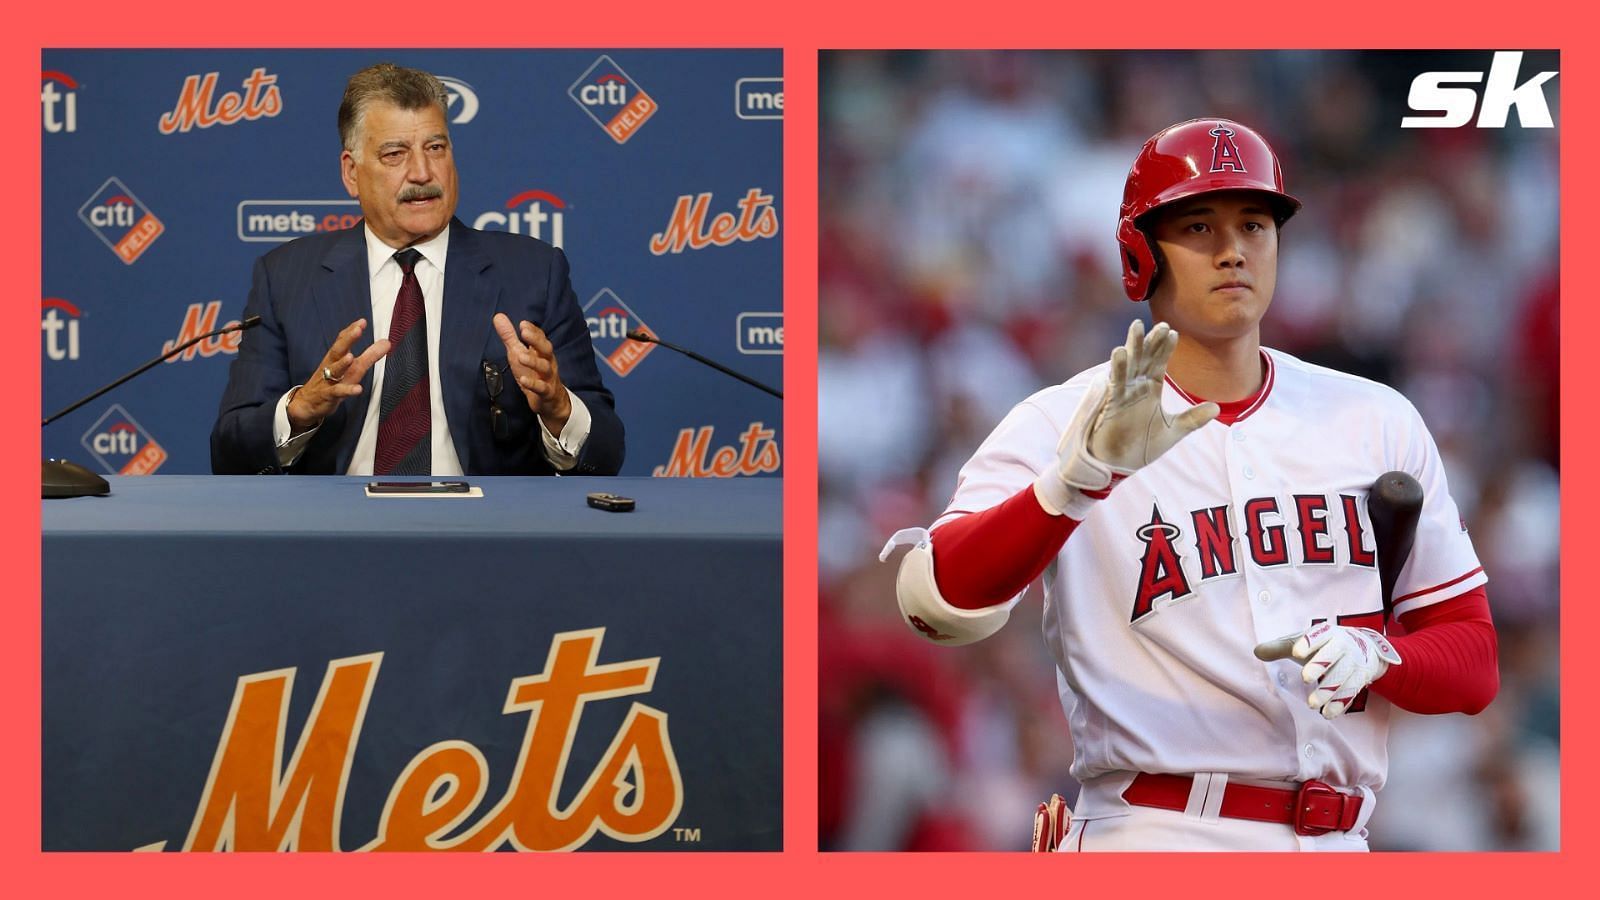 Keith Hernandez To Have His No. 17 Jersey Retired By Mets